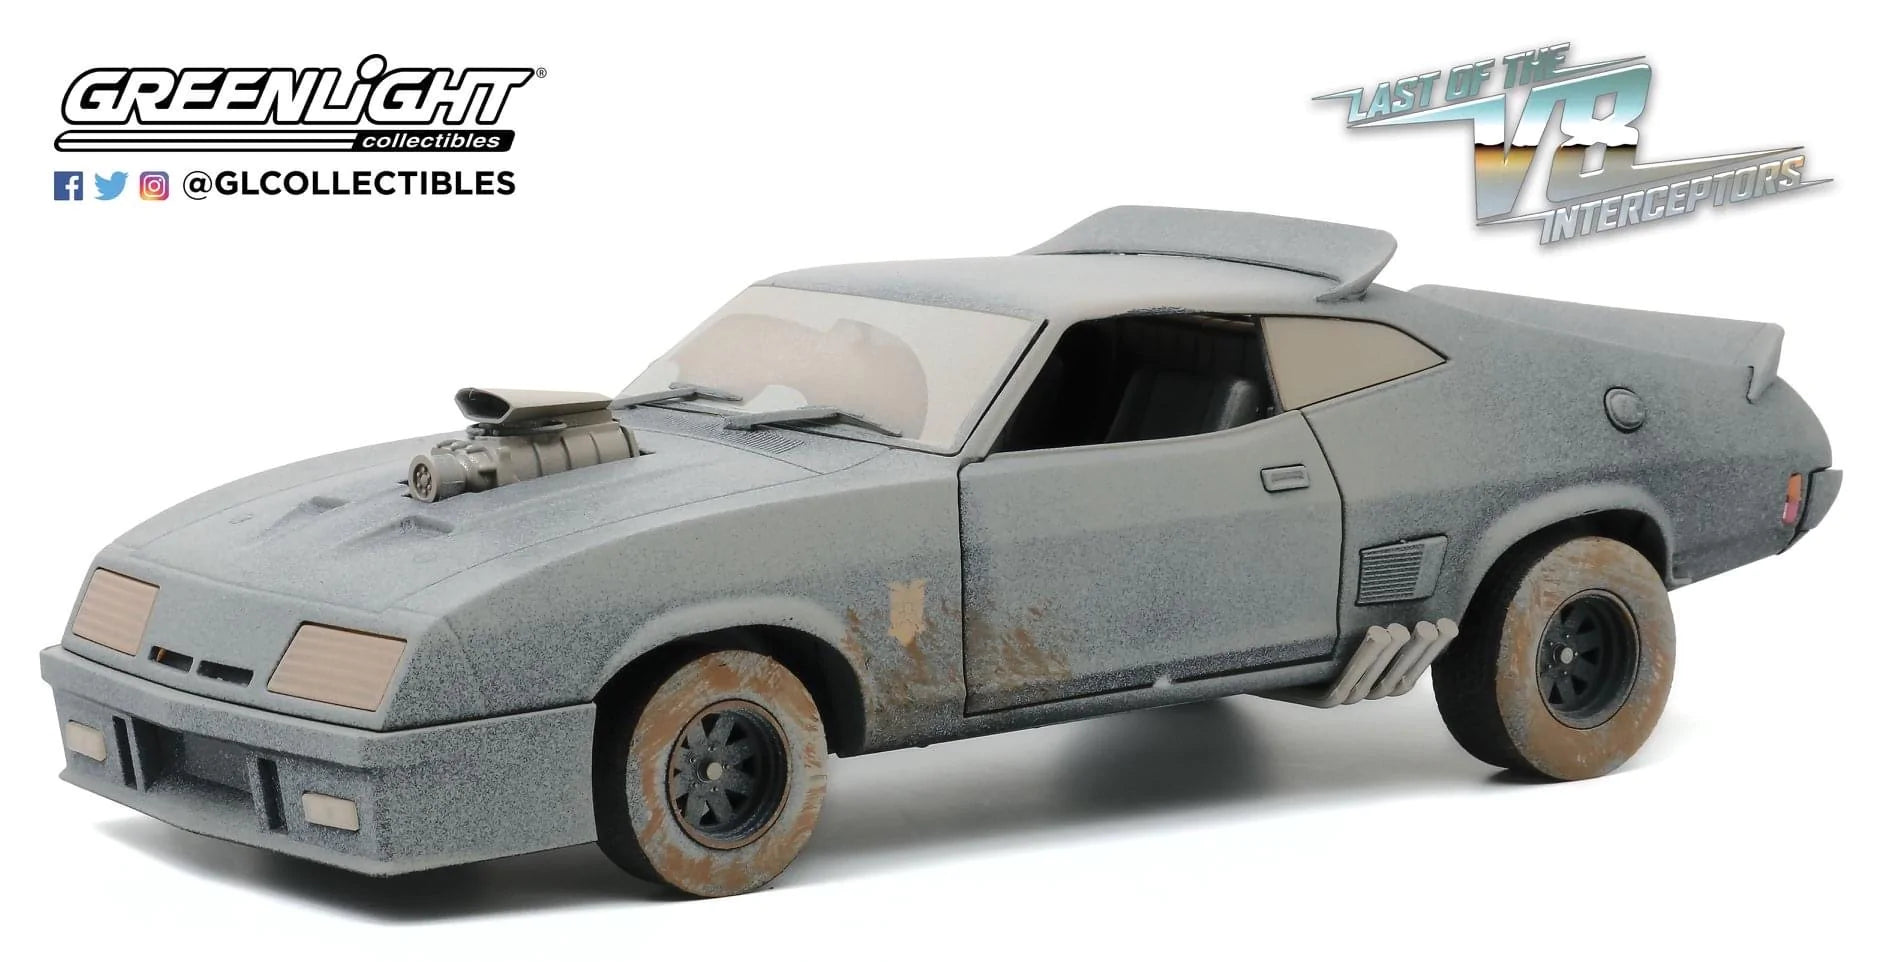 1973 Ford Falcon XB (Weathered Version) - Last of the V8 Interceptors